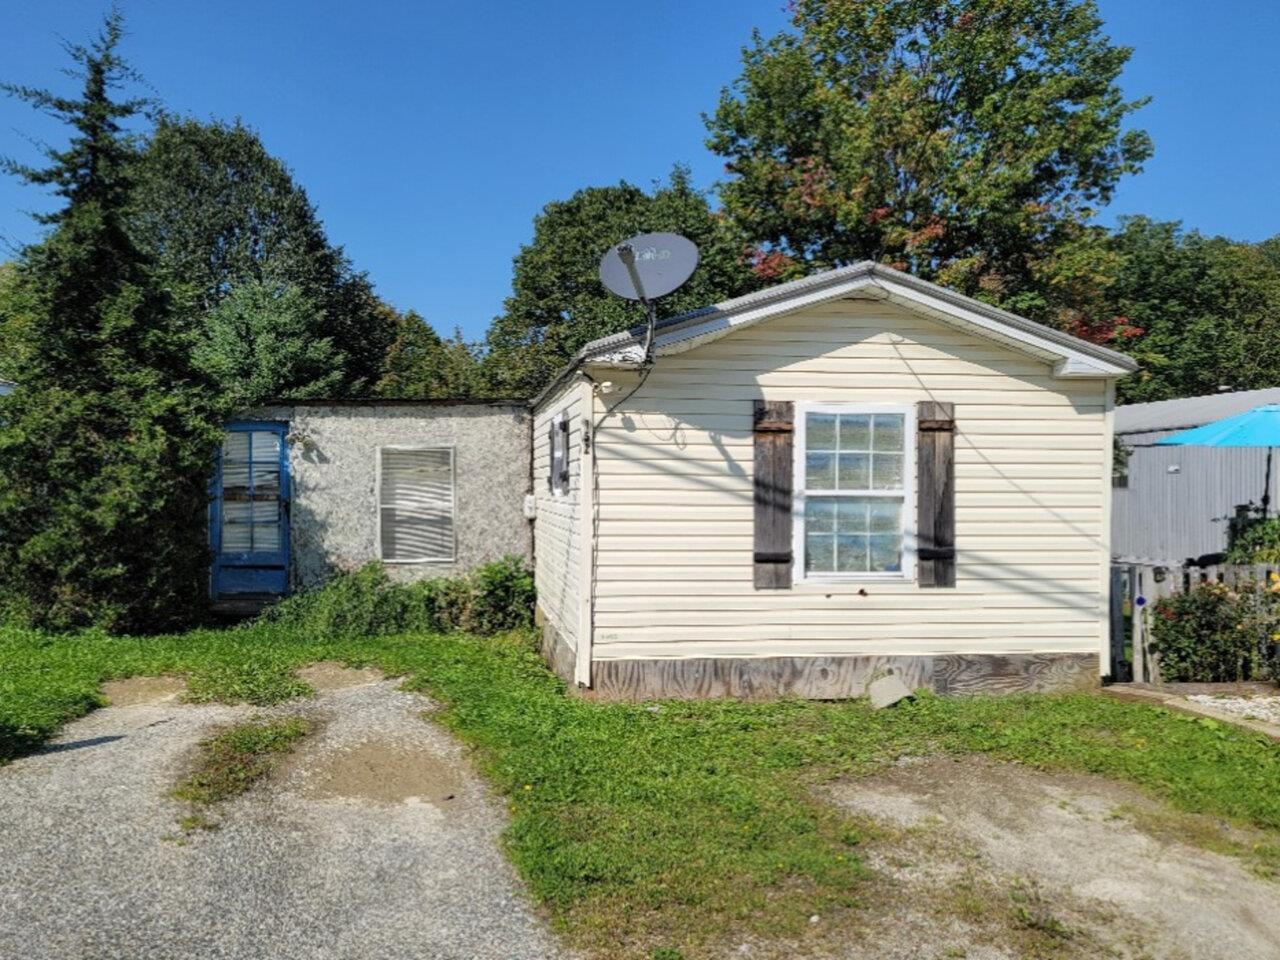 Sold property in Hinesburg